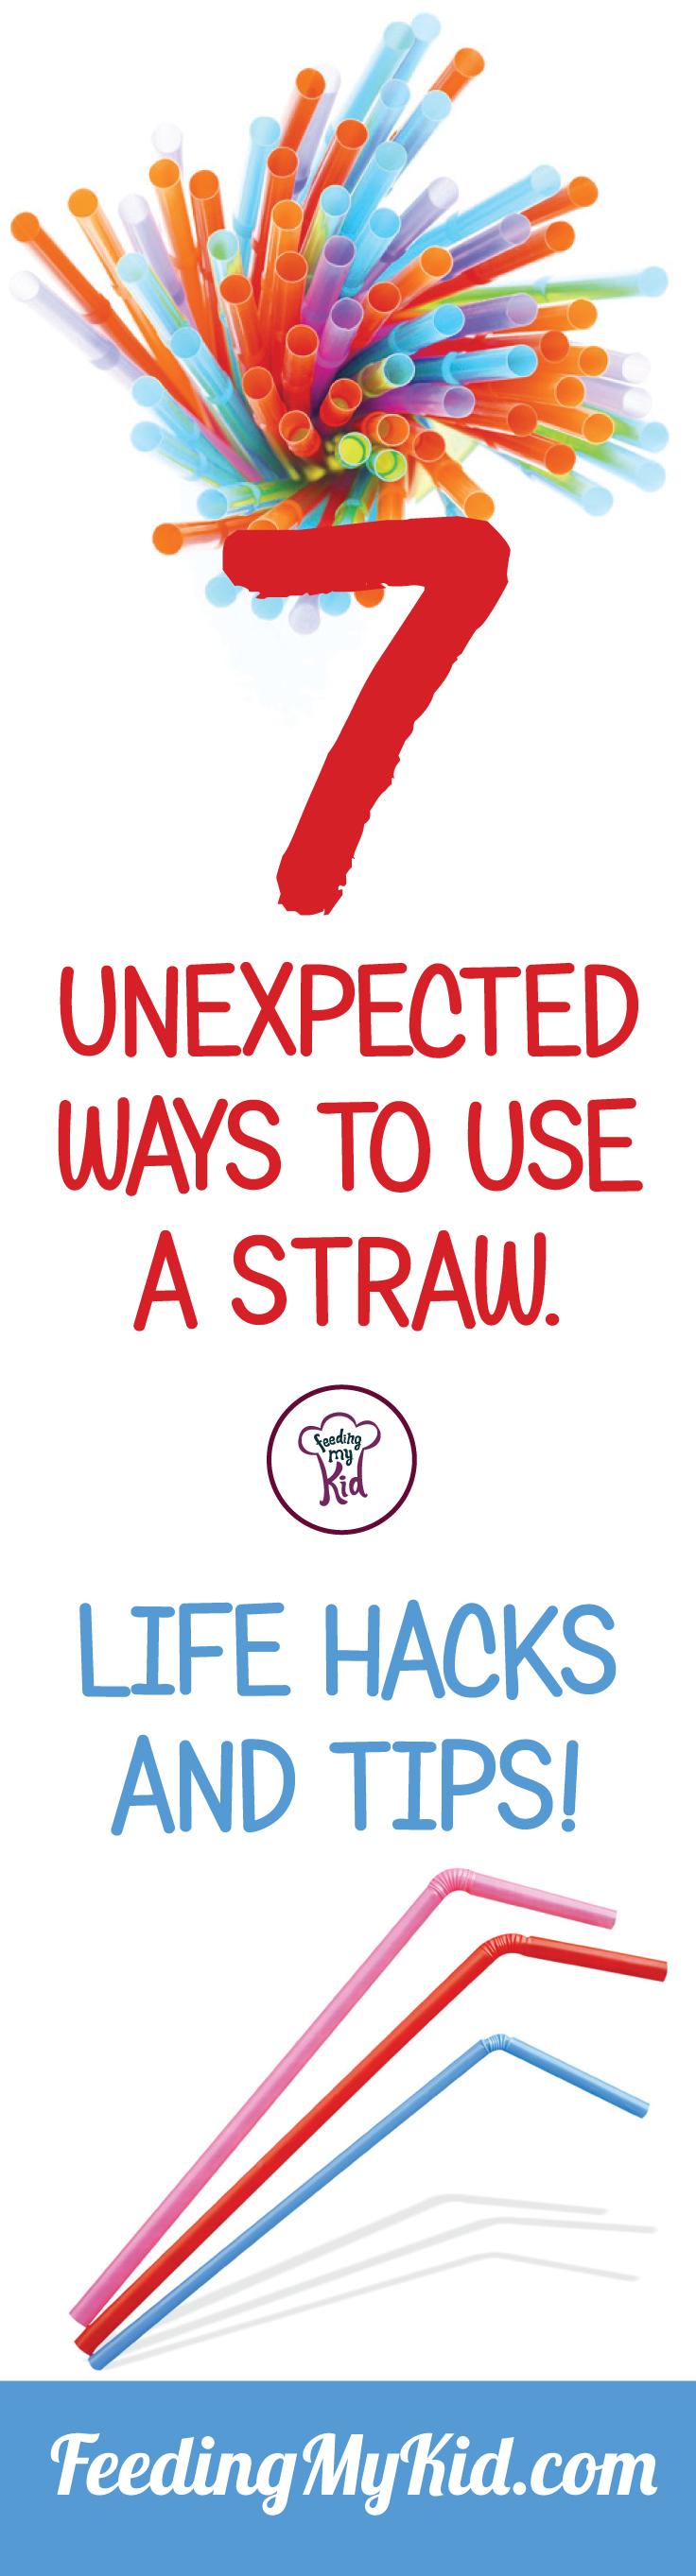 Check out these awesome life hacks and tips with drinking straws. It's amazing what you can do with a straw. Feeding My Kid is a filled with all the information you need about how to raise your kids, from healthy tips to nutritious recipes. #FeedingMyKid #lifehacks #tips